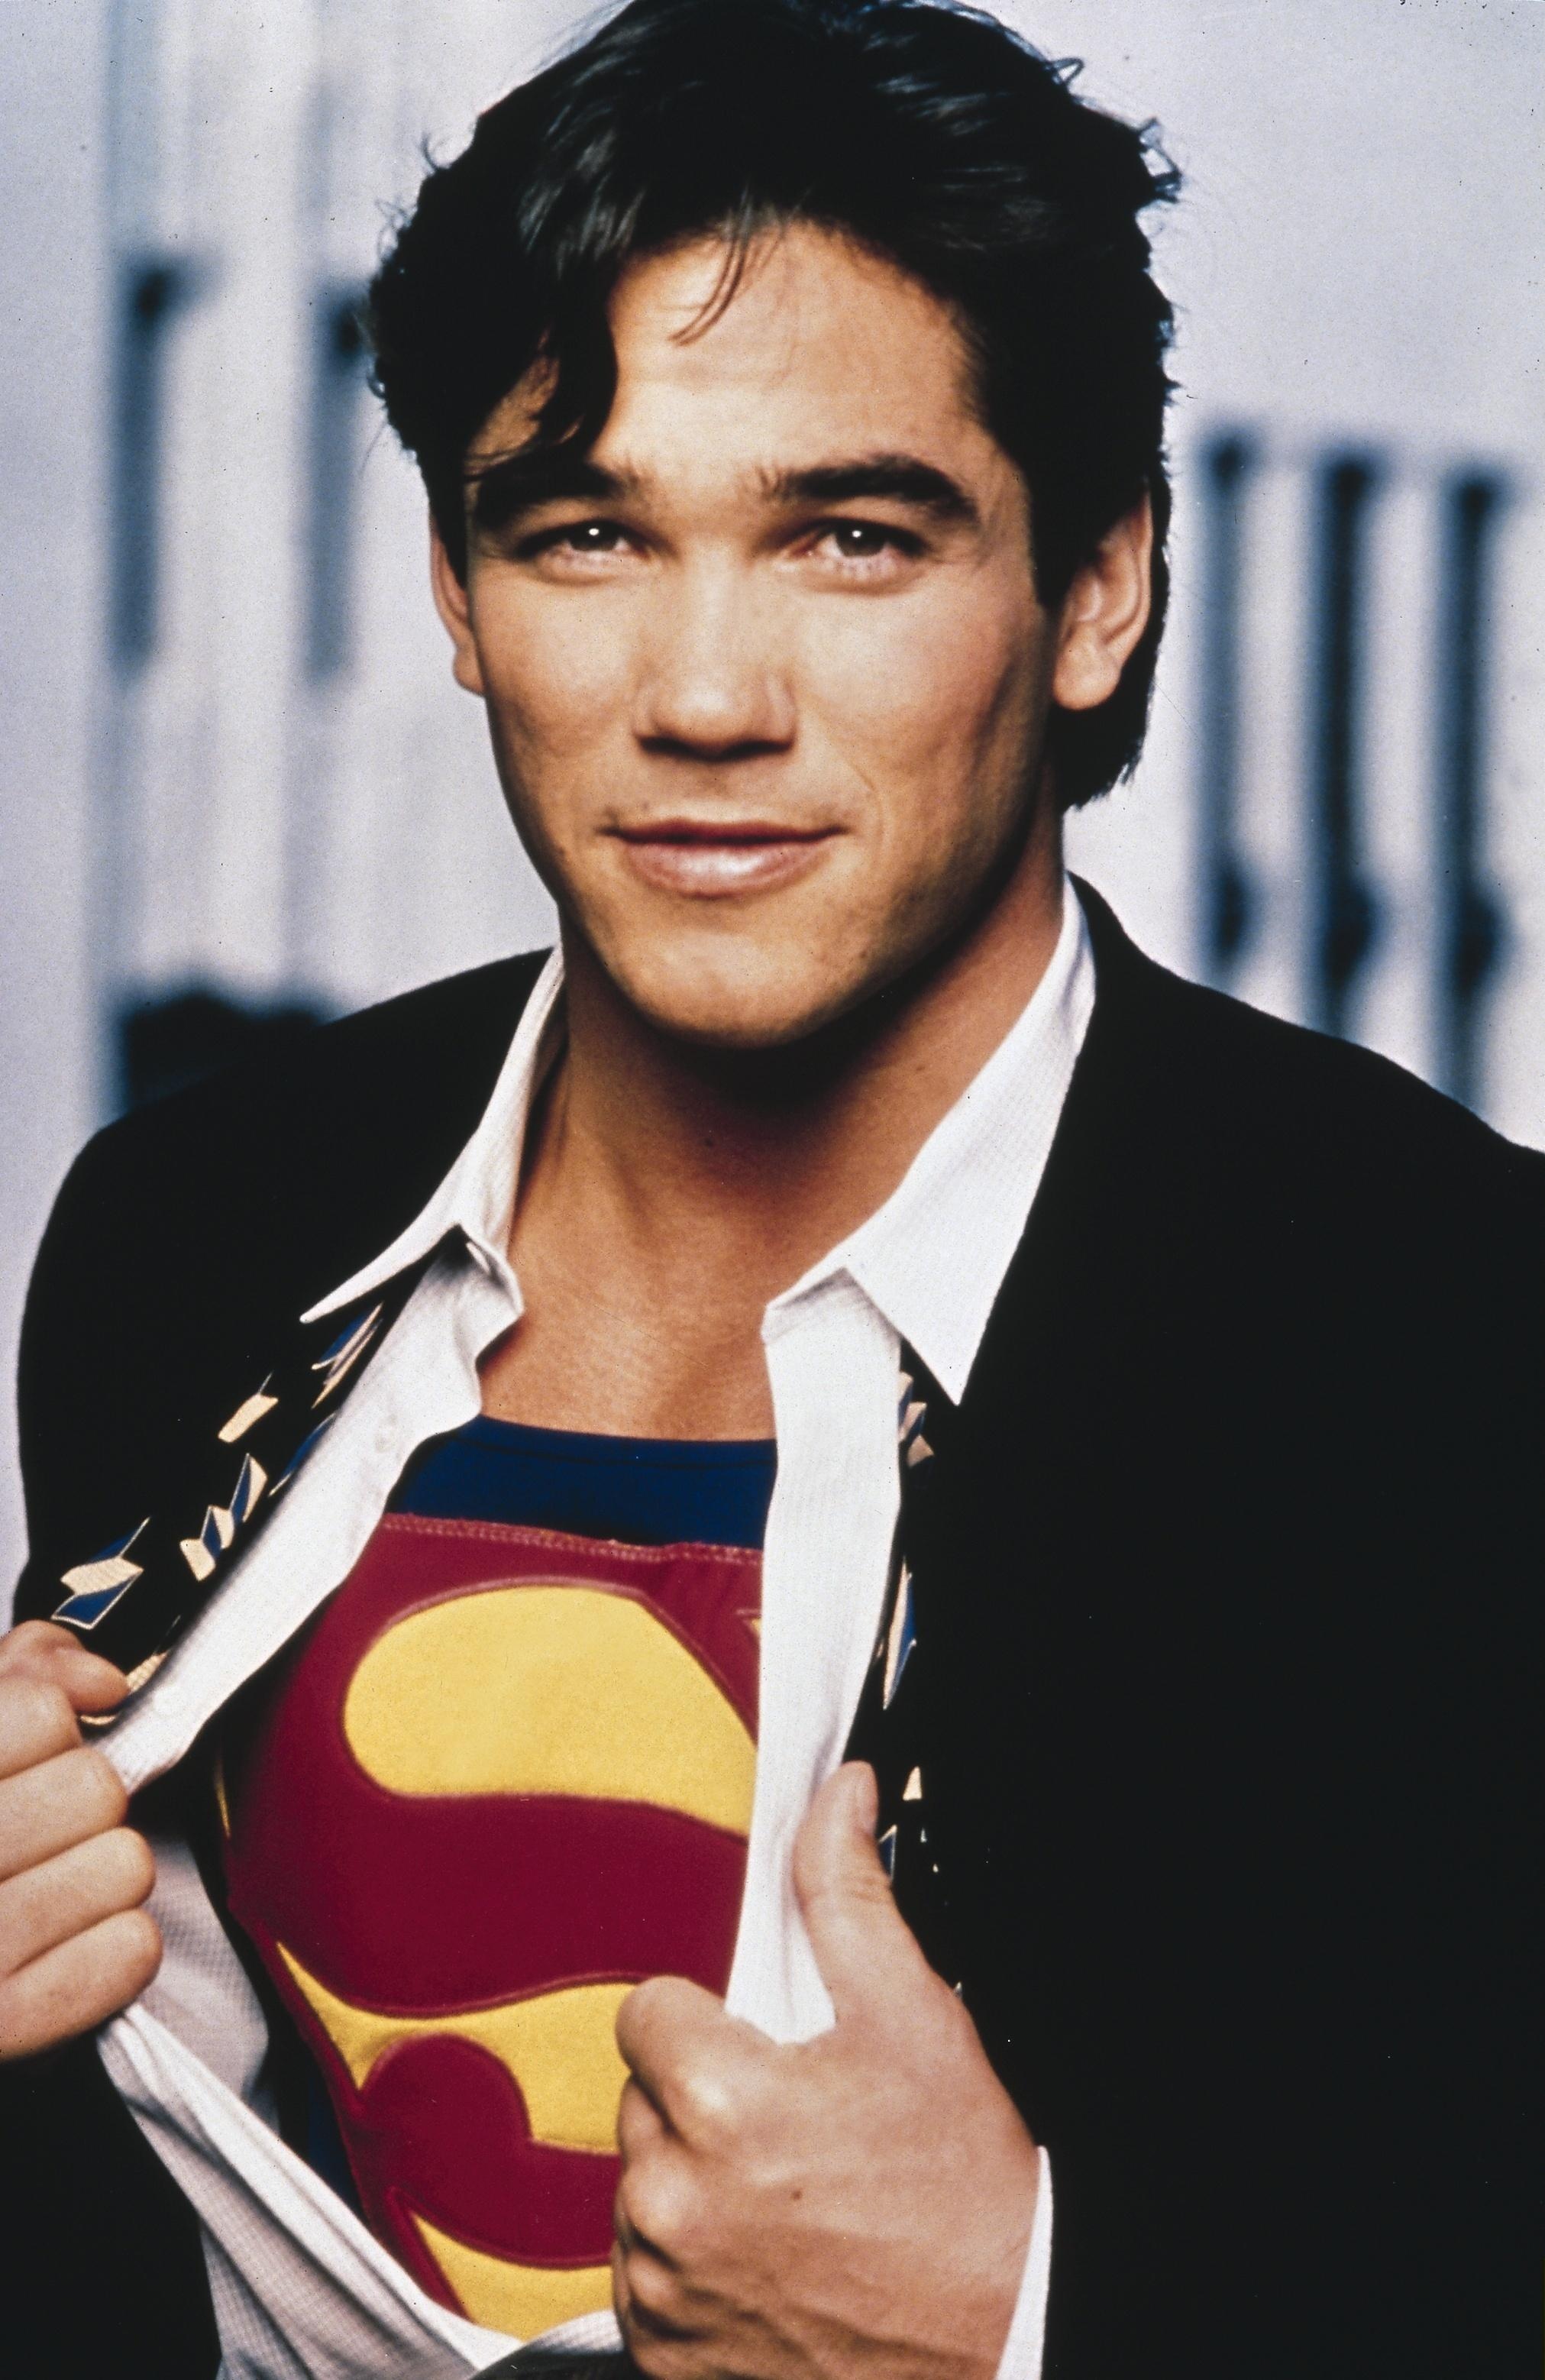 Lois and Clark: The New Adventures of Superman: Dean Cain, The first one to audition for the lead role, and was the first confirmed actor in the main cast. 2030x3120 HD Background.